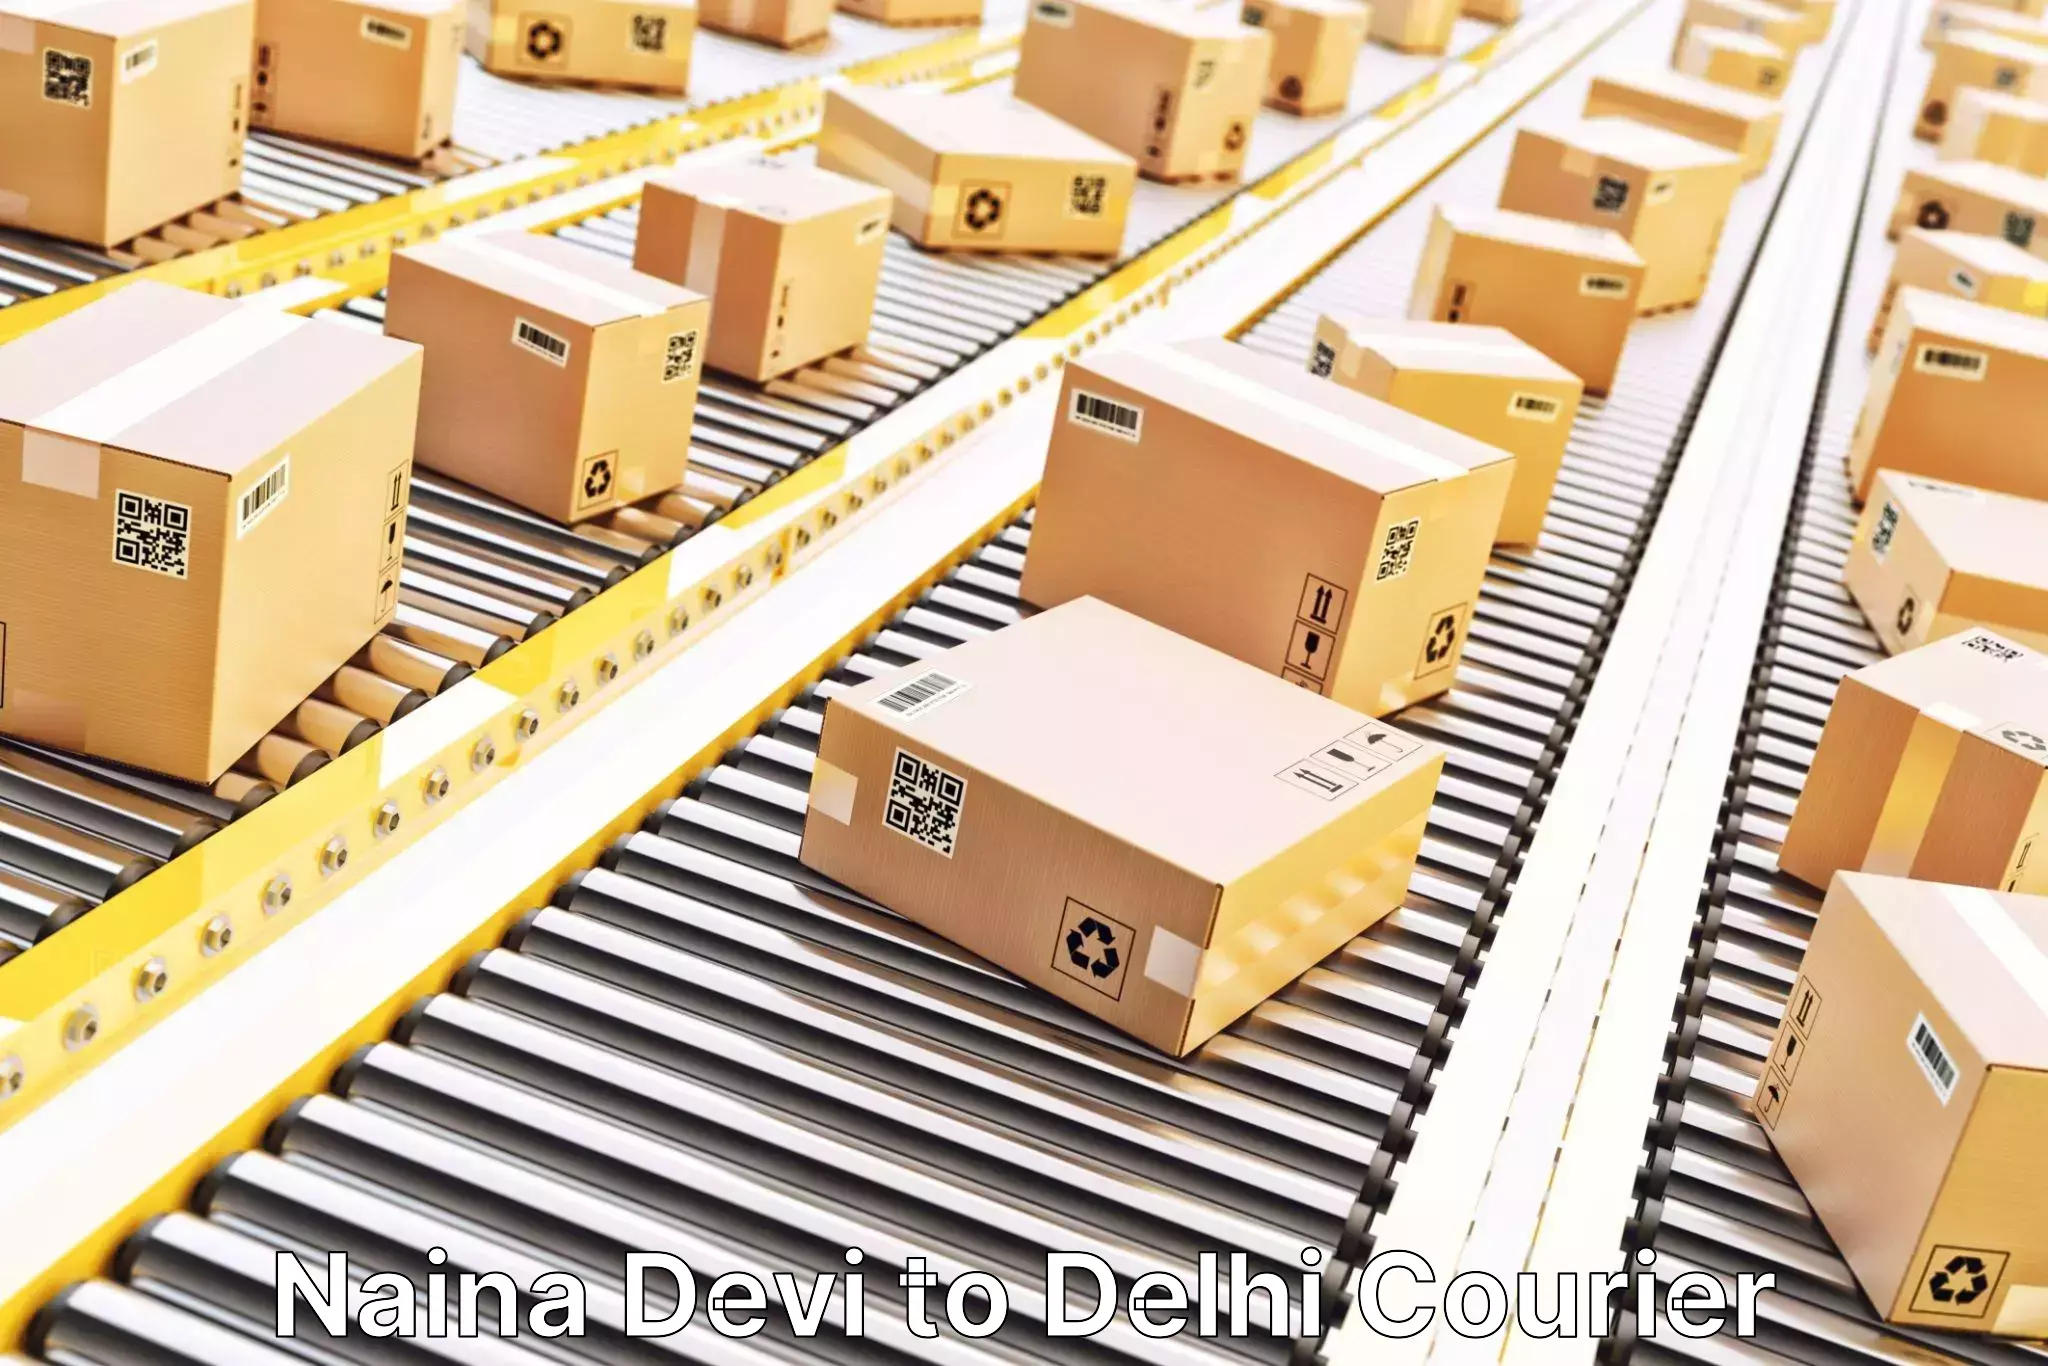 Advanced freight services Naina Devi to NCR